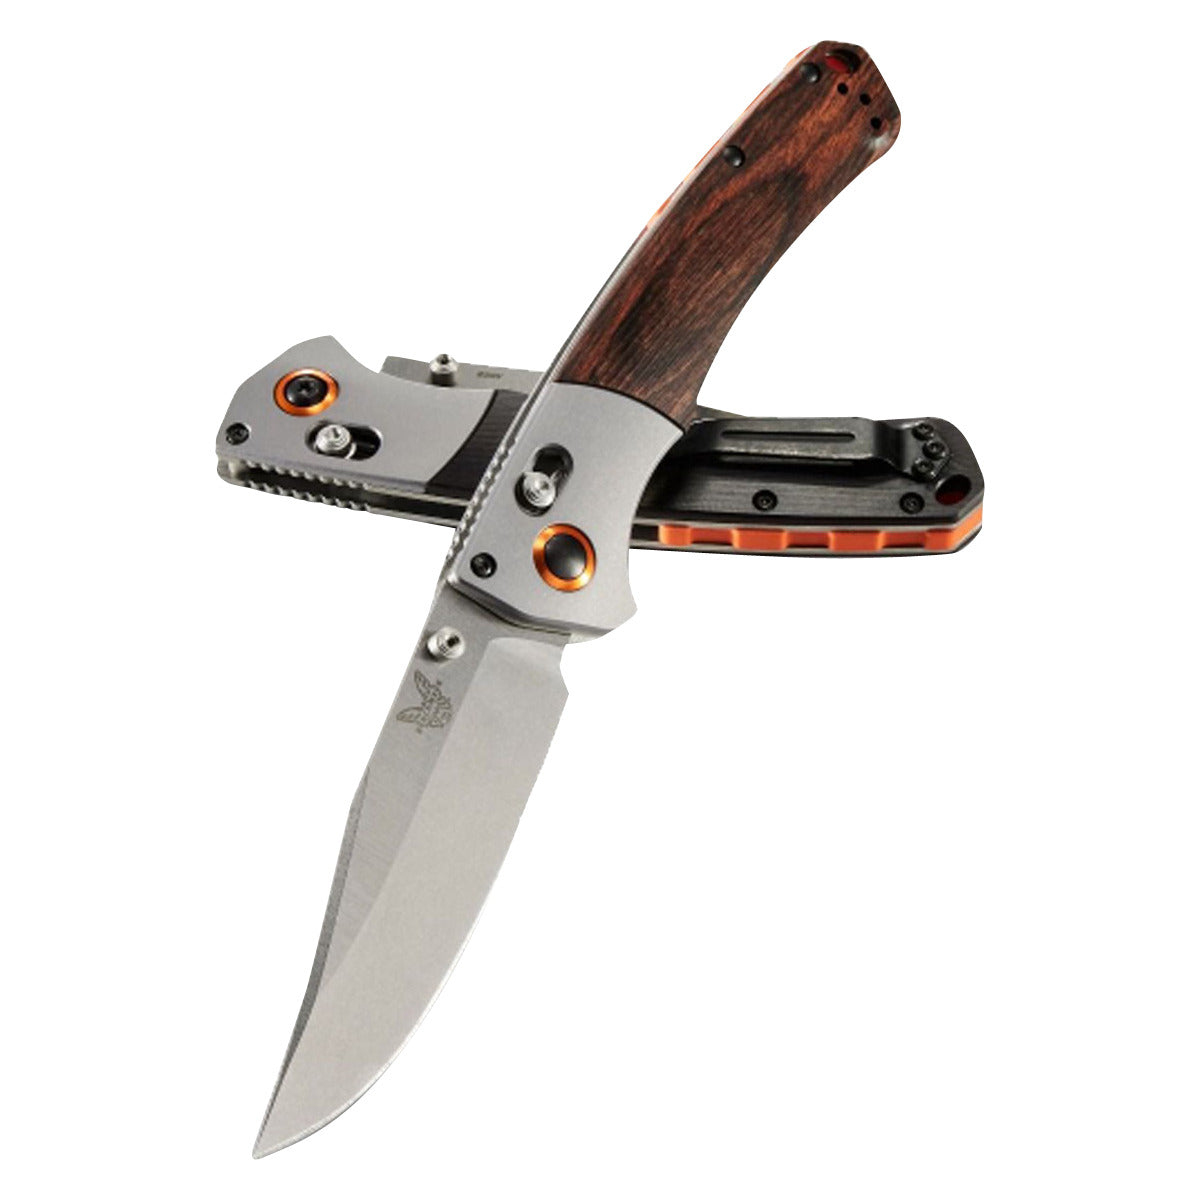 Benchmade 15080-2 Crooked River | GOHUNT